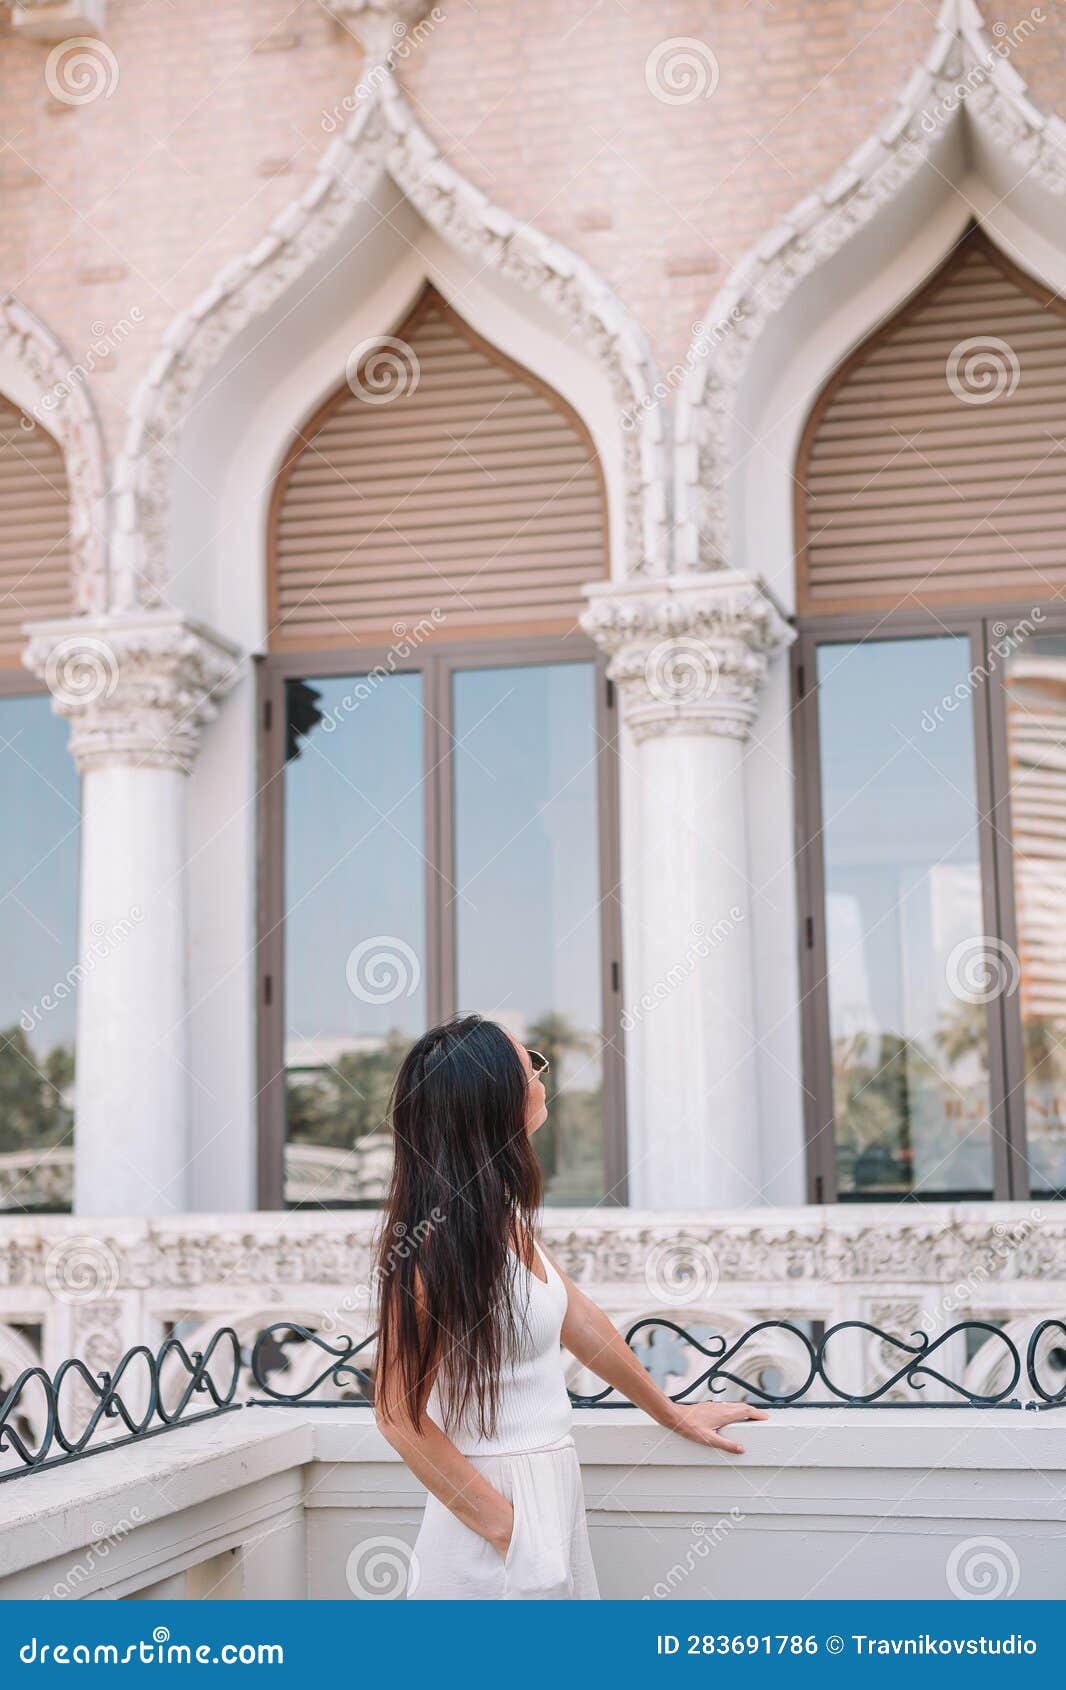 Beautiful lady watching the famous hotel in Las Vegas, standing in the busy  city. Famous tourist Stock Photo by travnikovstudio